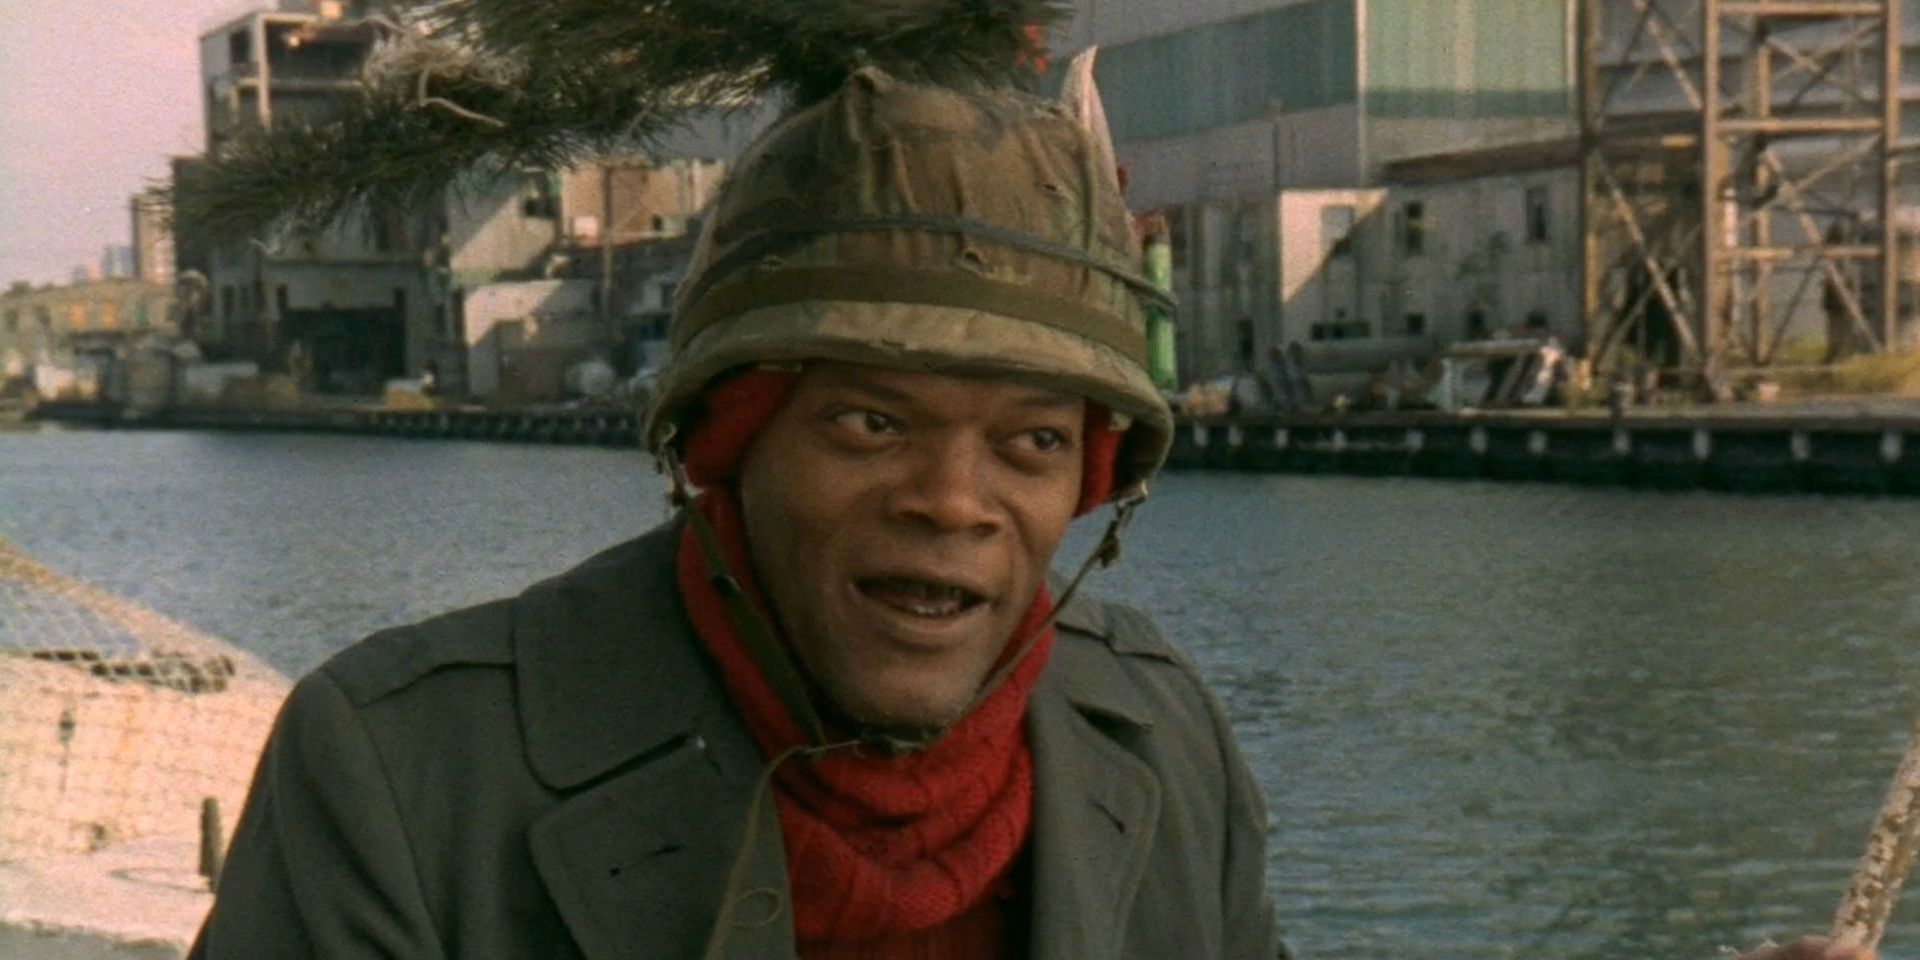 The Search For One-Eye Jimmy Samuel L Jackson